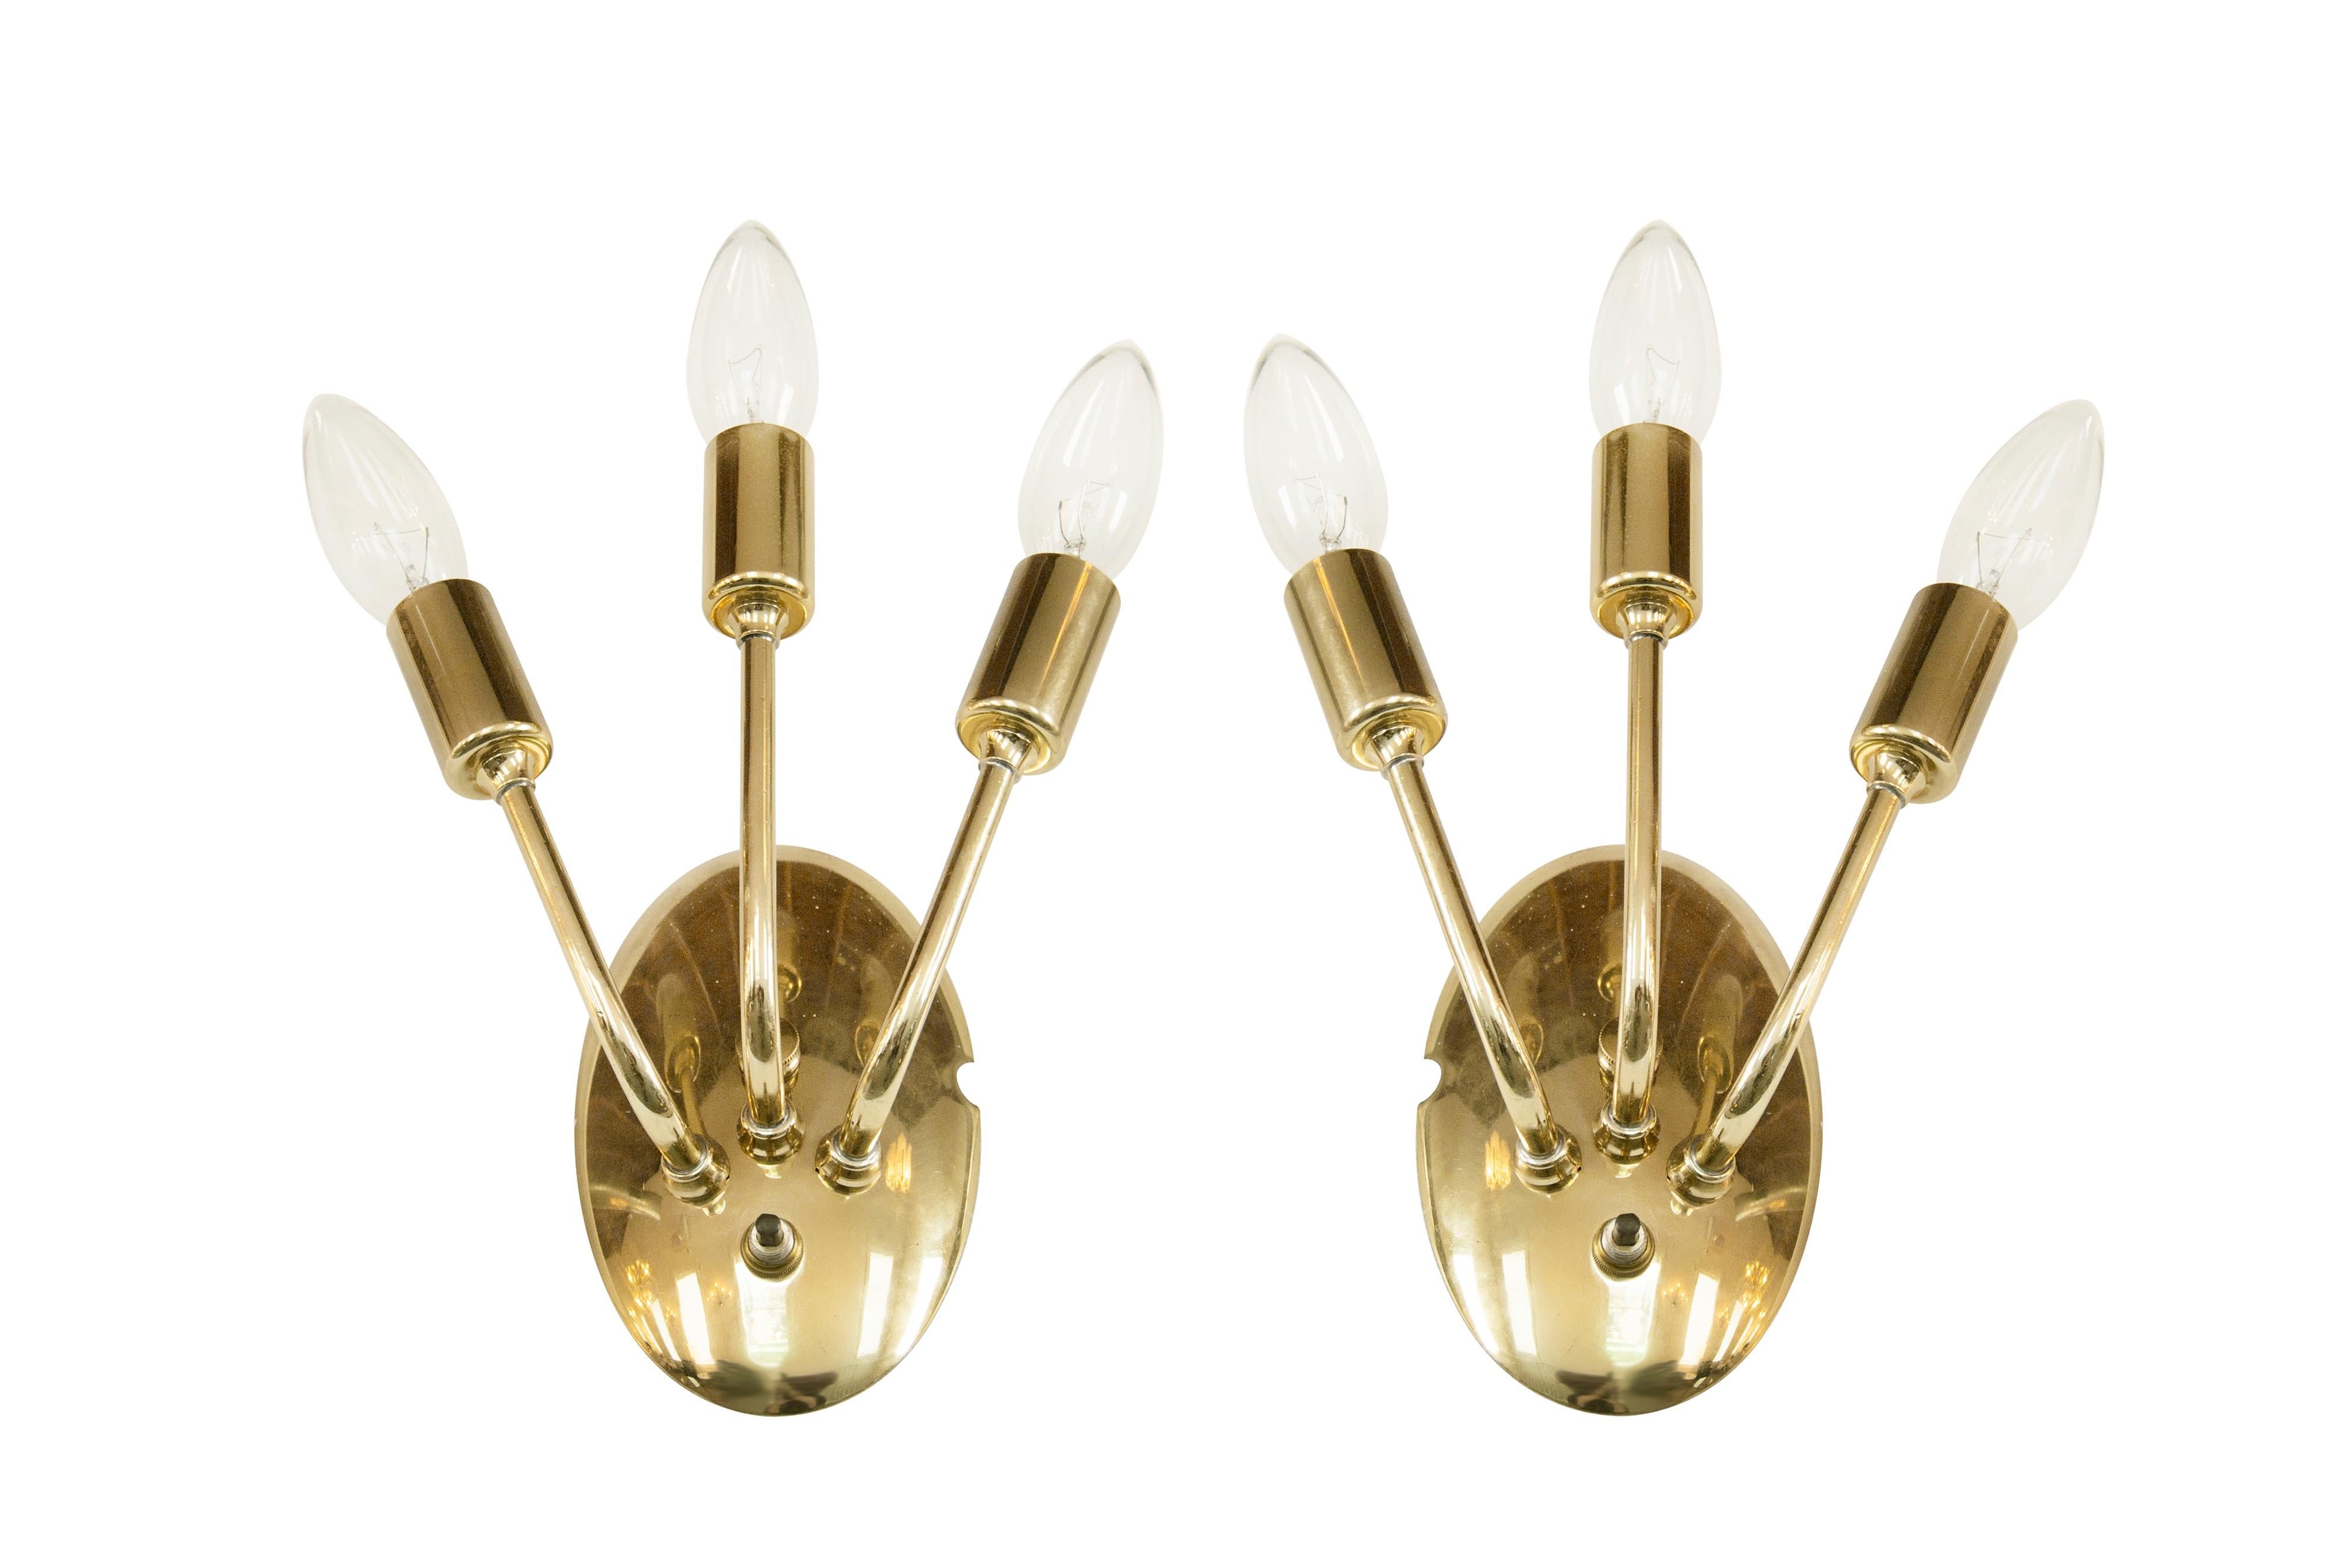 Pair of sconces original from Italy, circa 1950s. Brass has been hand polished. Fully rewired.